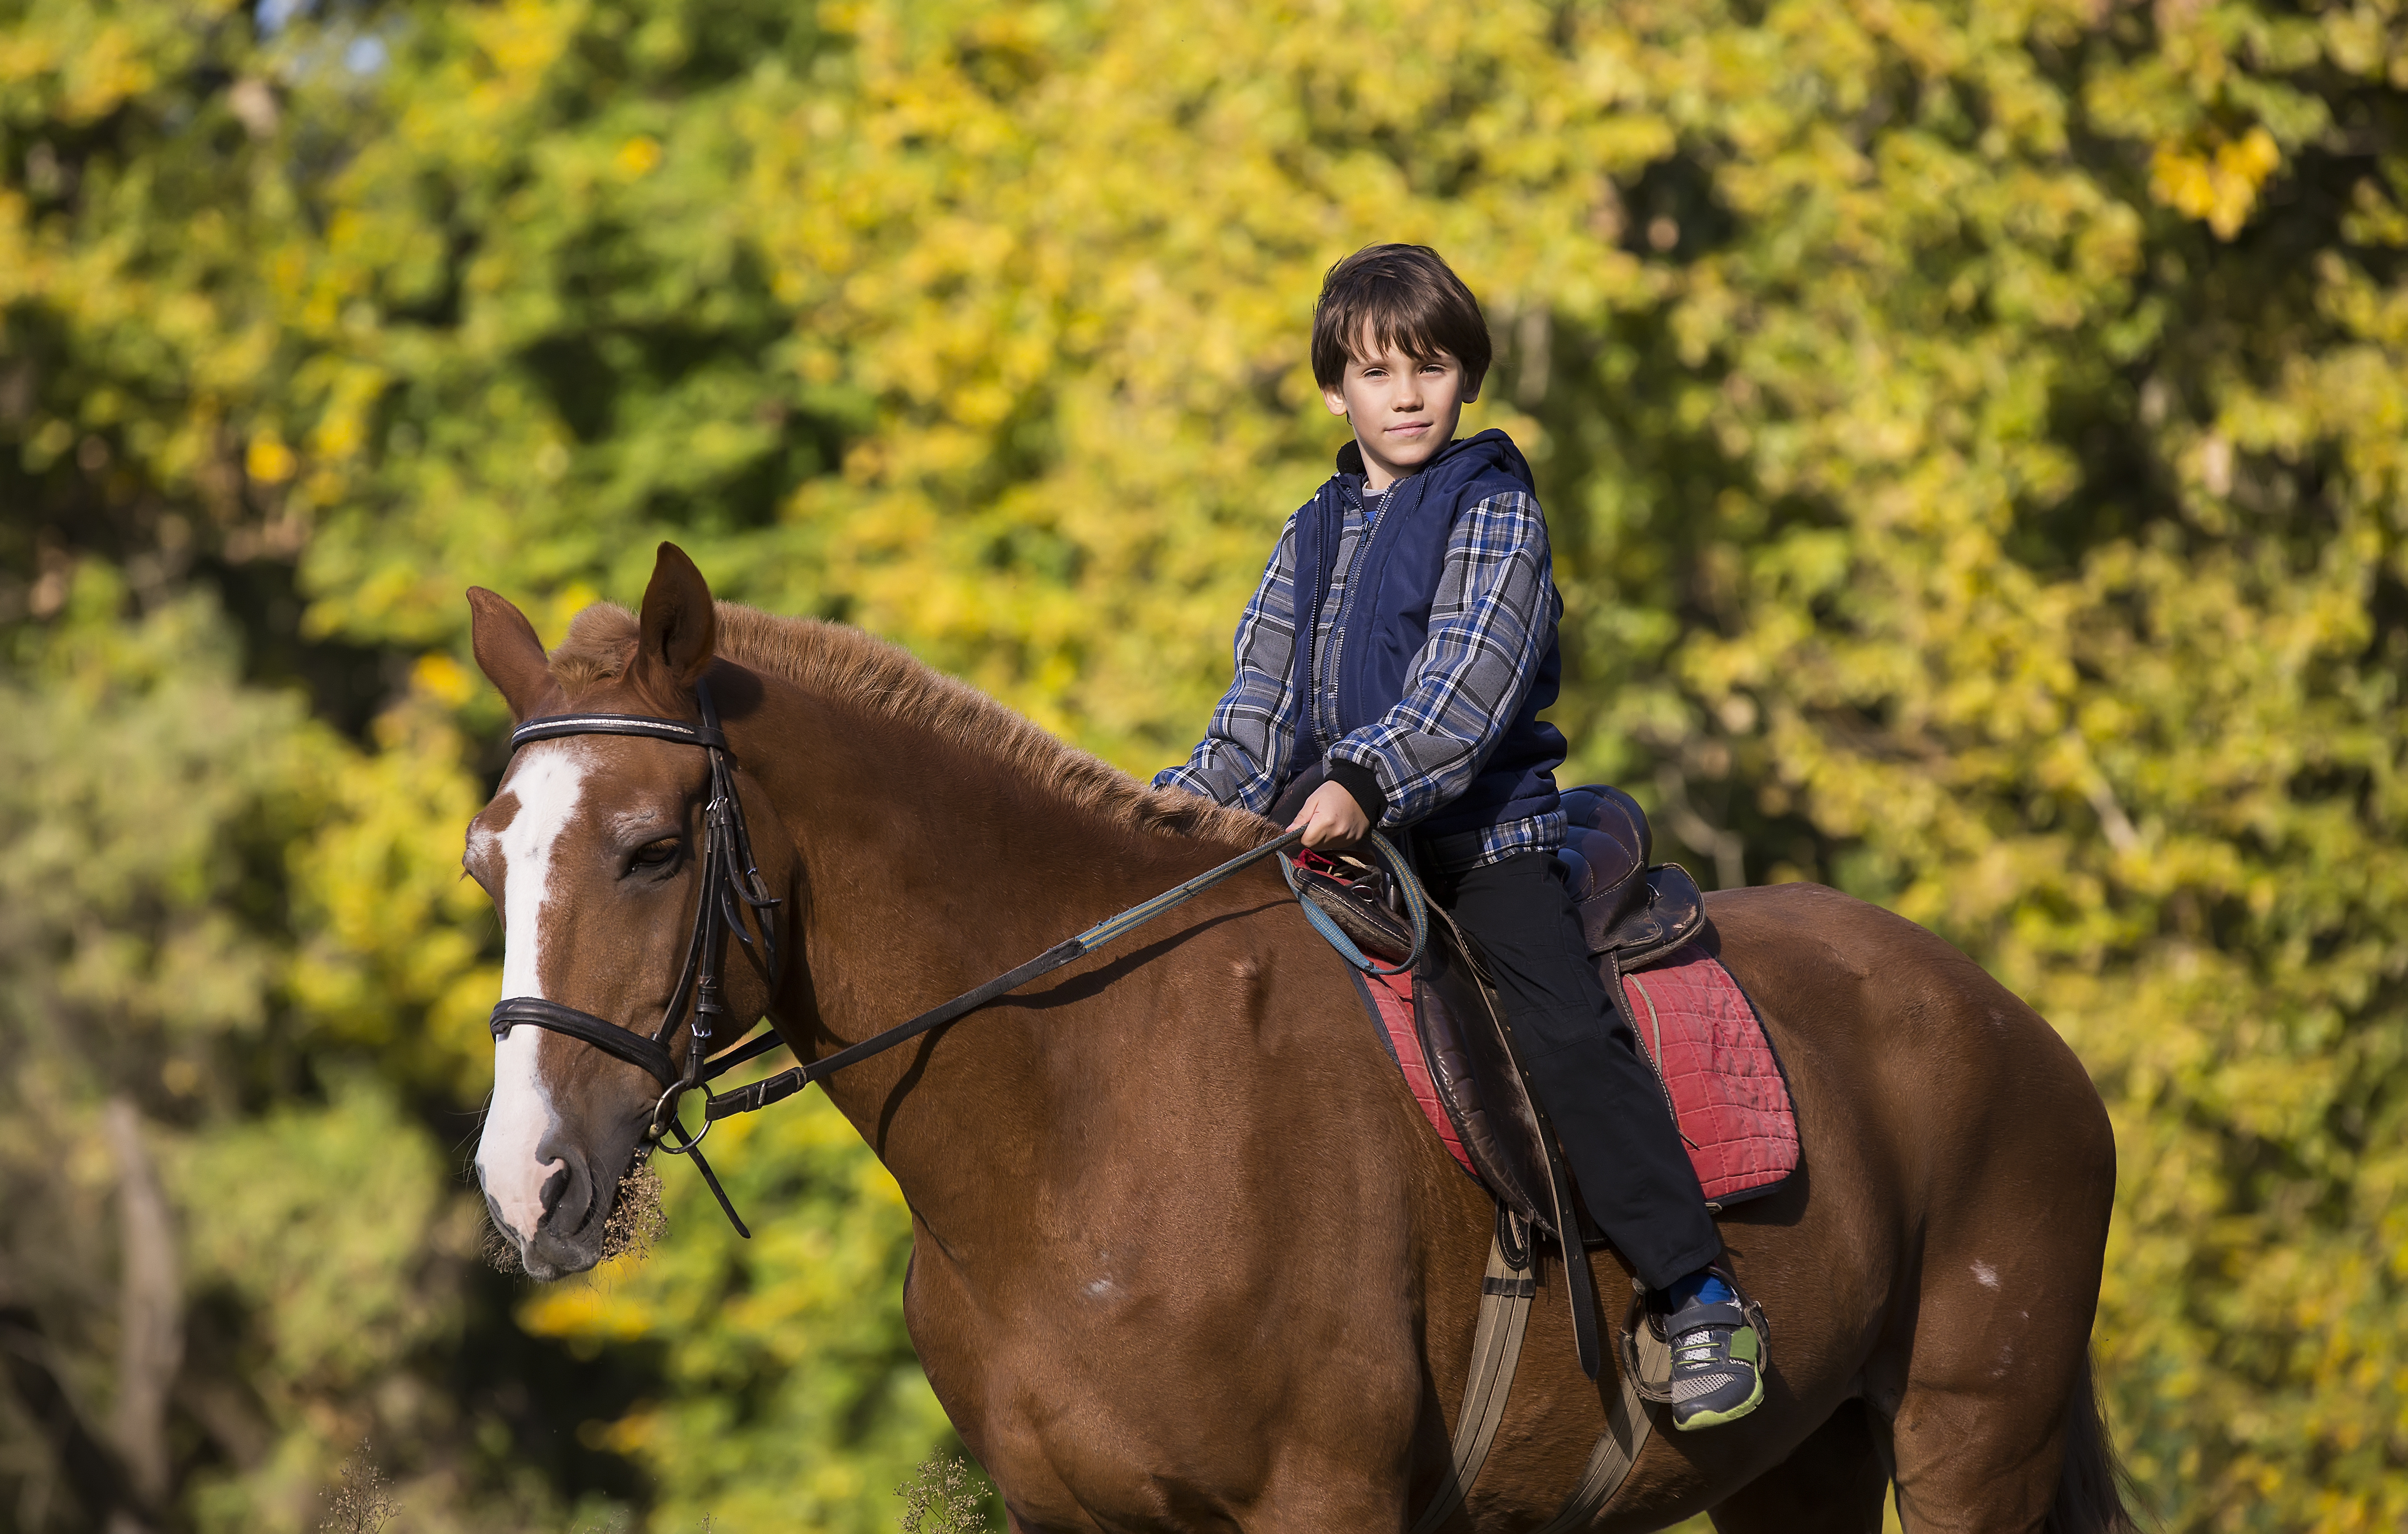 beginner horse riding tips - young boy riding on horse